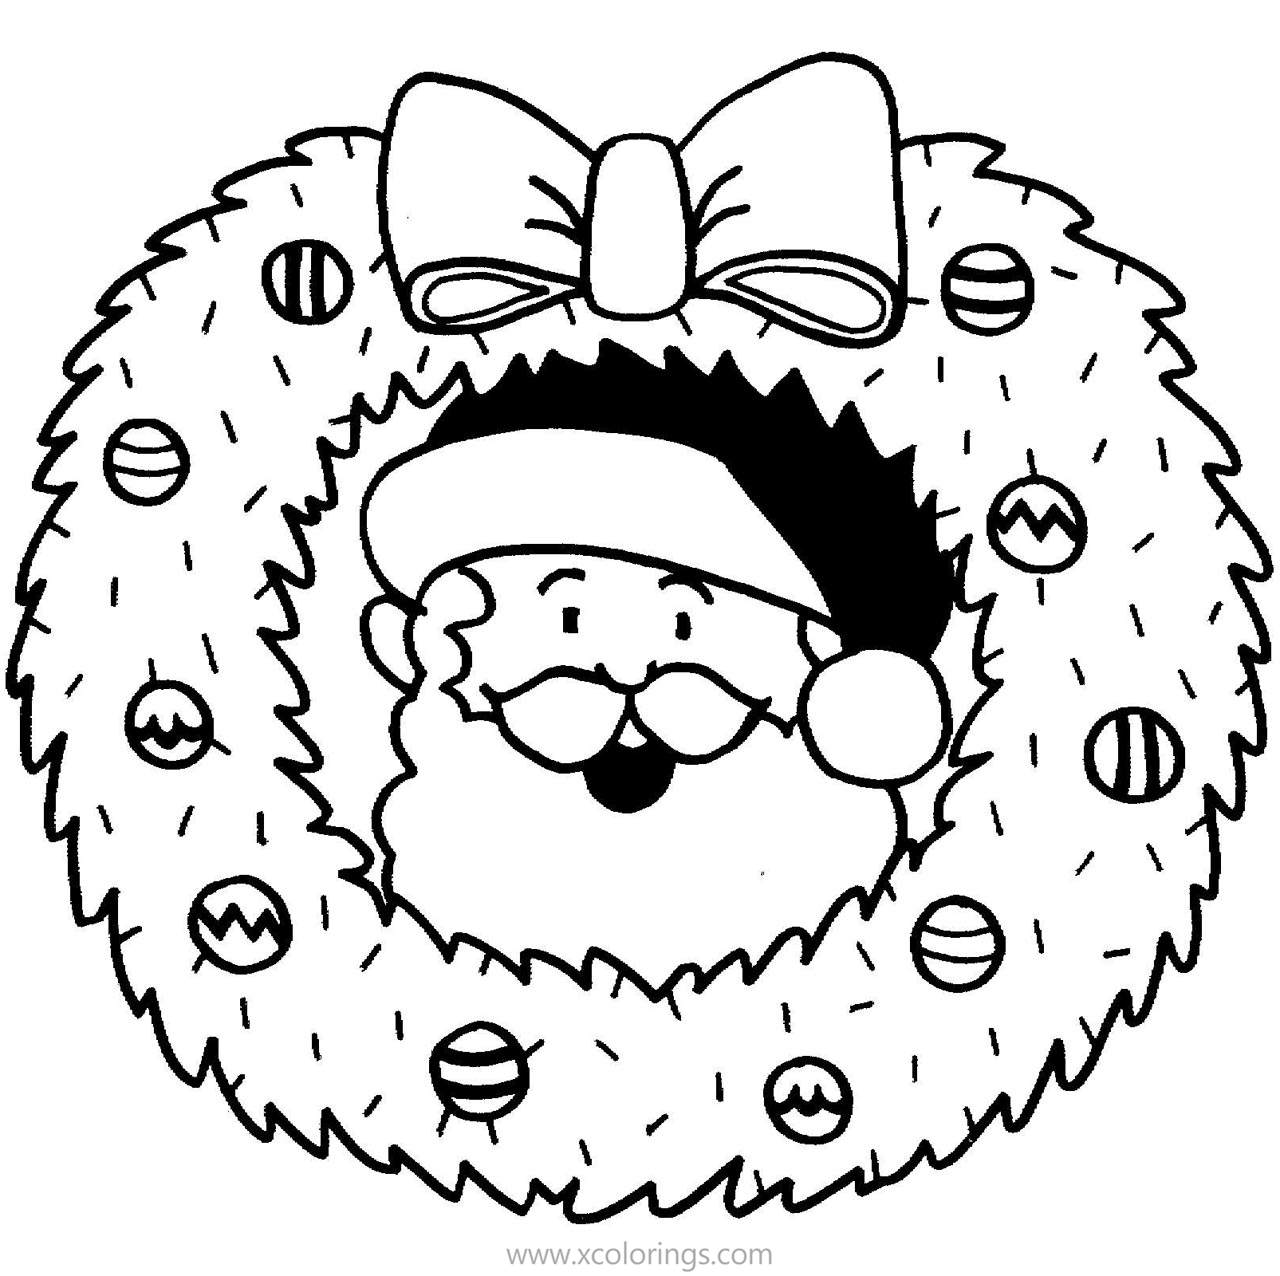 Free Santa Claus Christmas Wreath Coloring Pages printable